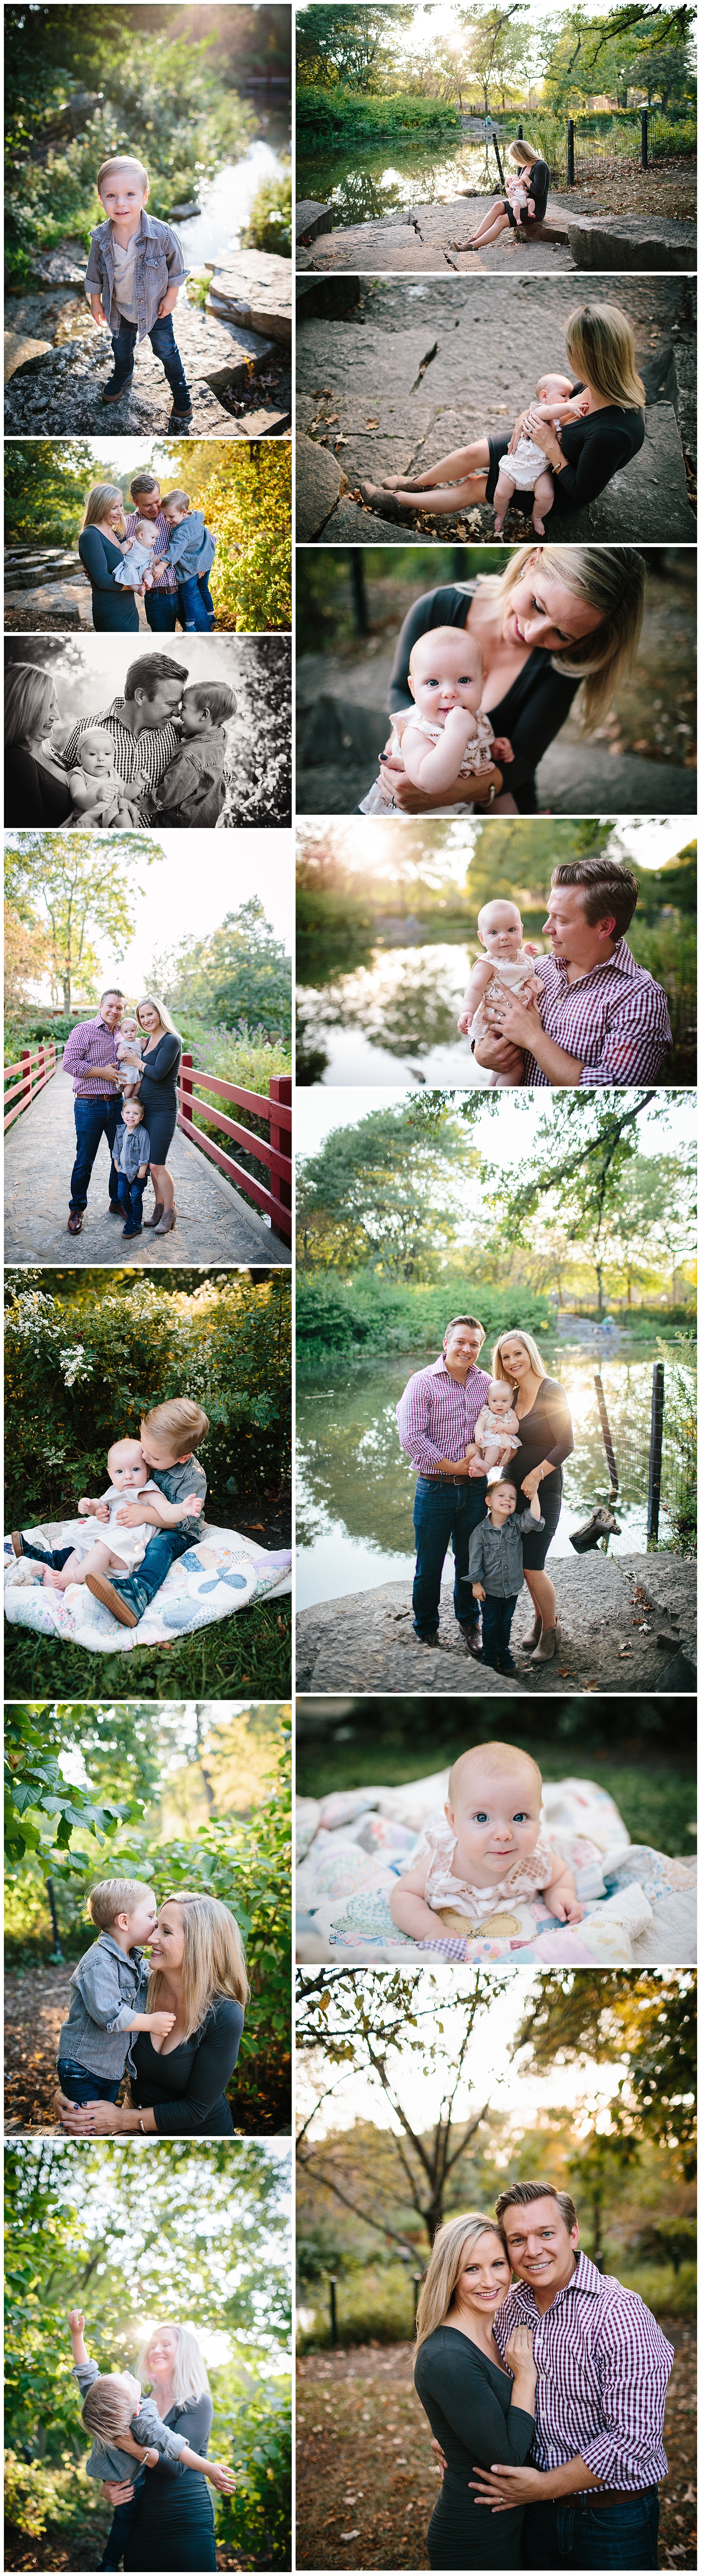 Chicago IL Family Photographer | Patricia Anderson Photography